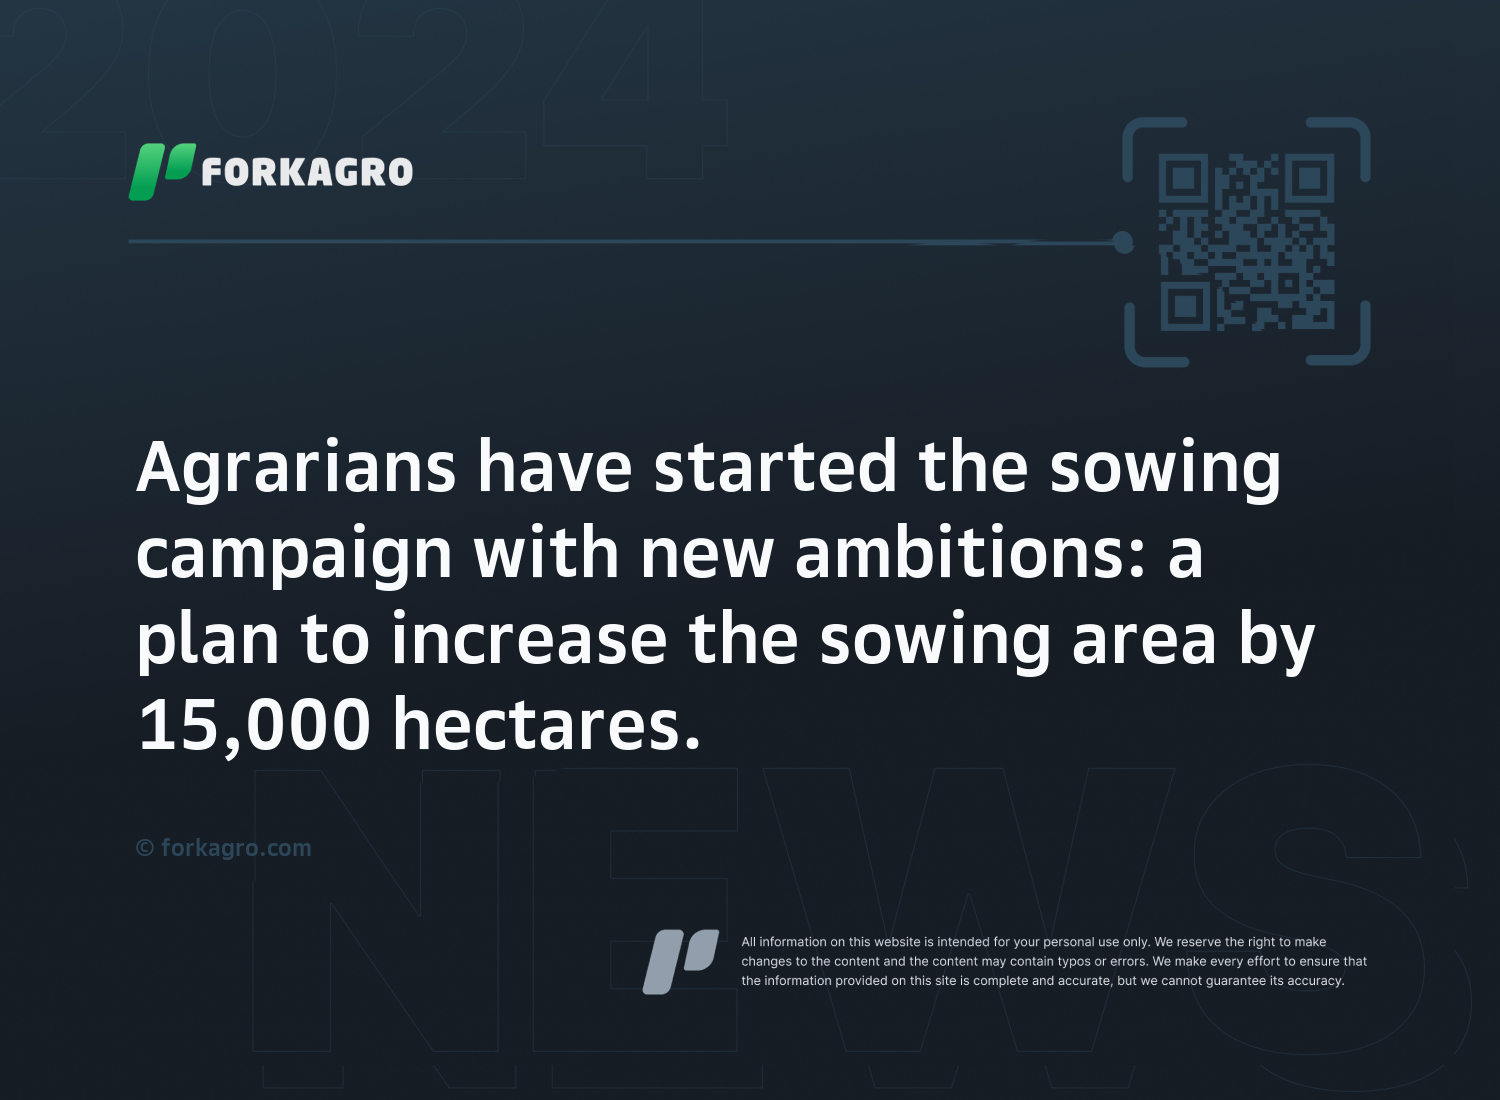 Agrarians have started the sowing campaign with new ambitions: a plan to increase the sowing area by 15,000 hectares.